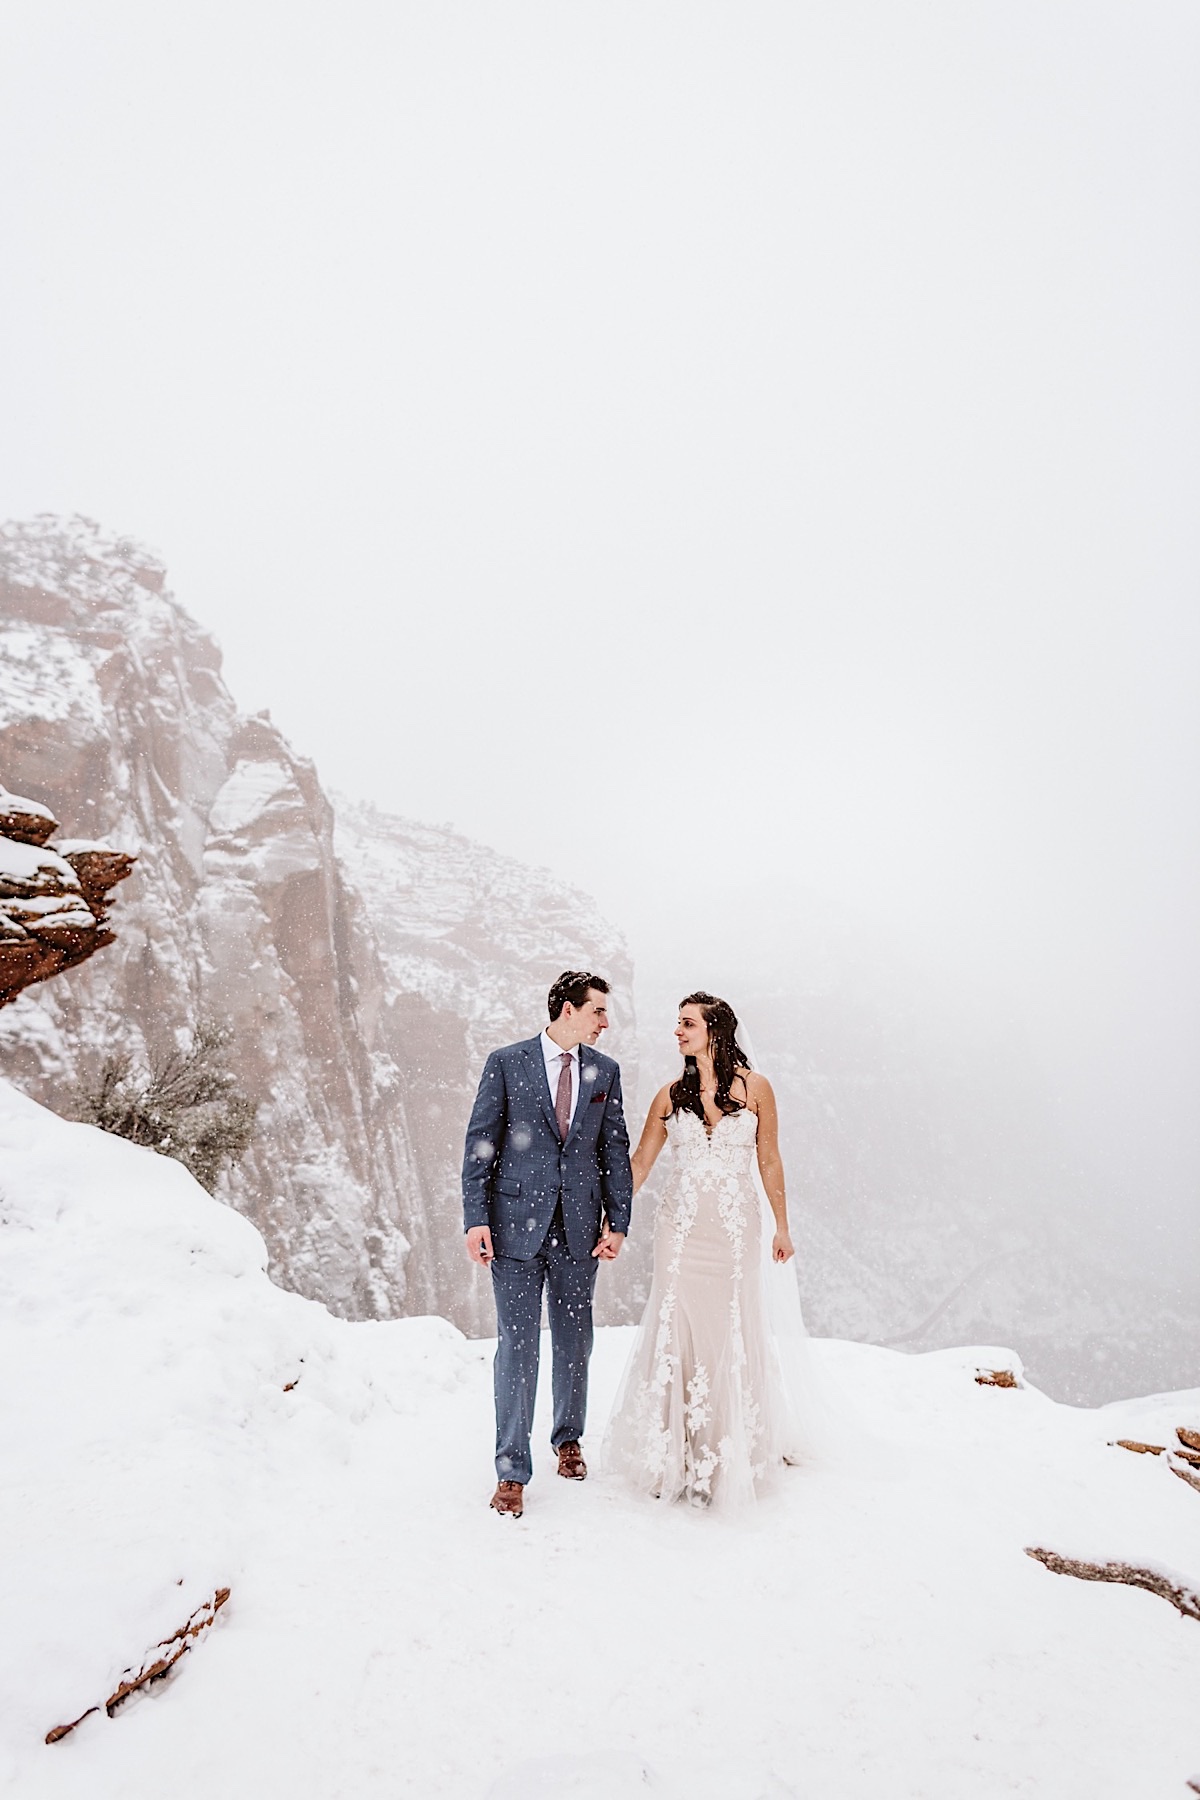 Bride and groom hold hands and look at each other at Canyon Overlook as snow falls around them.